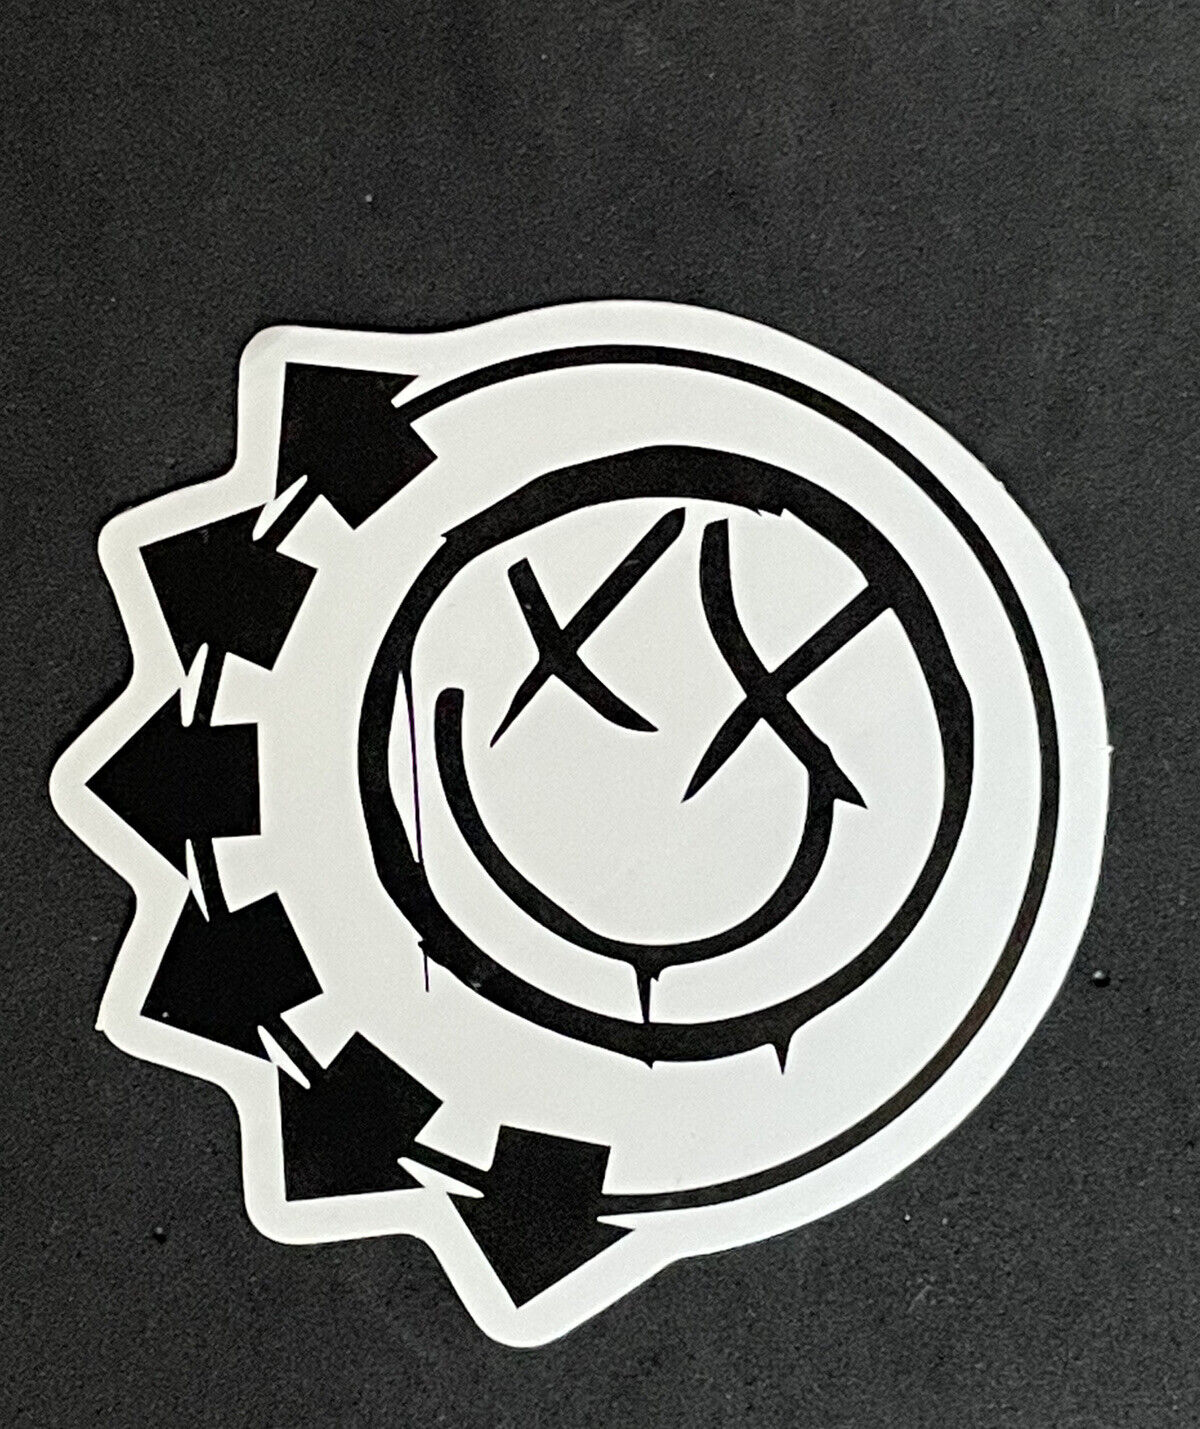 Blink 182 Punk Rock 90s Band Sticker Decal California For Laptop Skate Board New